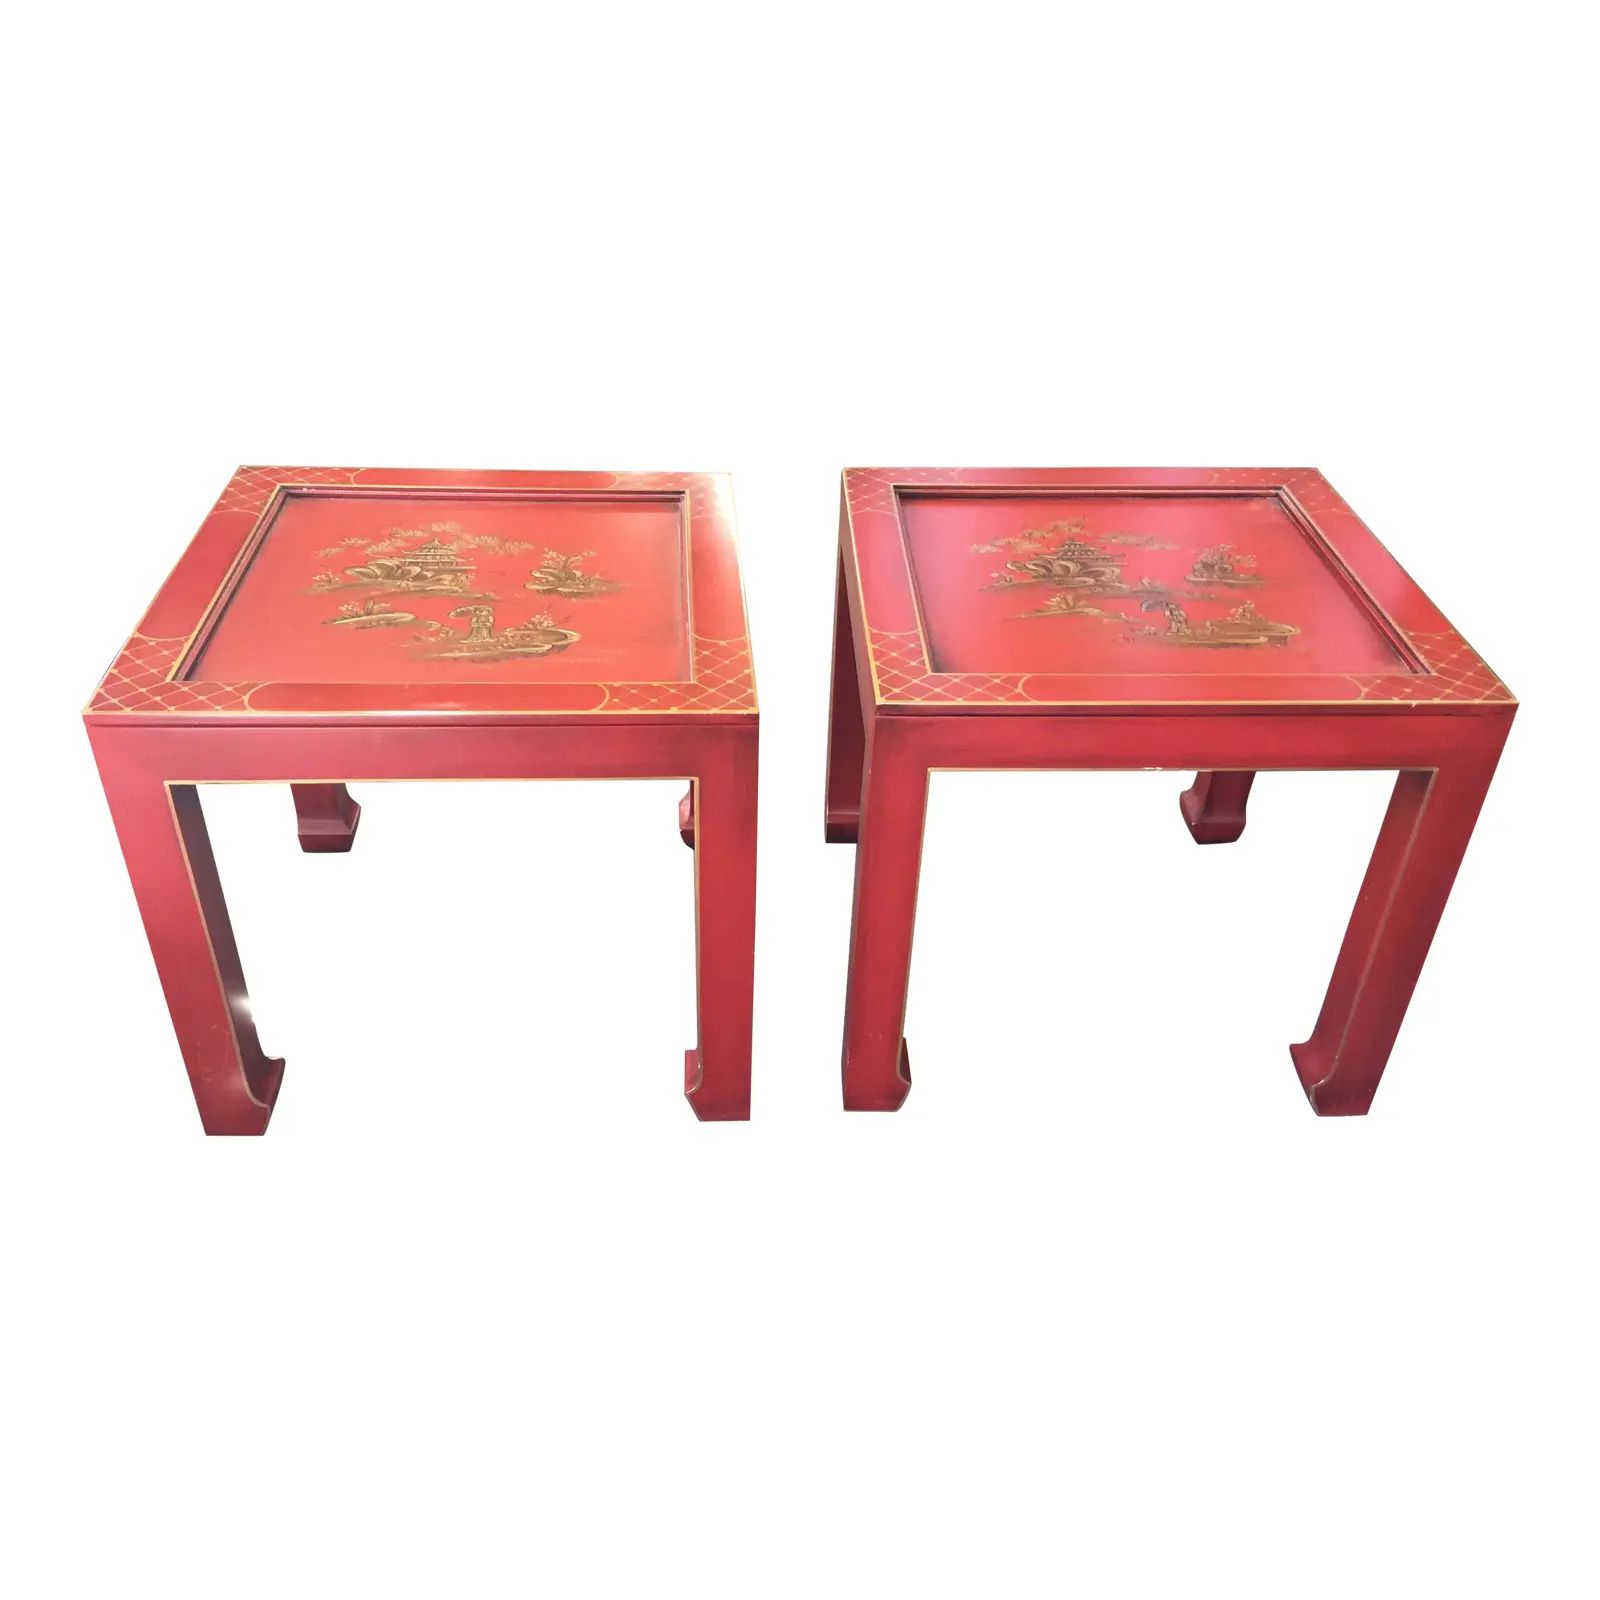 Hand Painted Chinoiserie Tables Signed Retha | Chairish